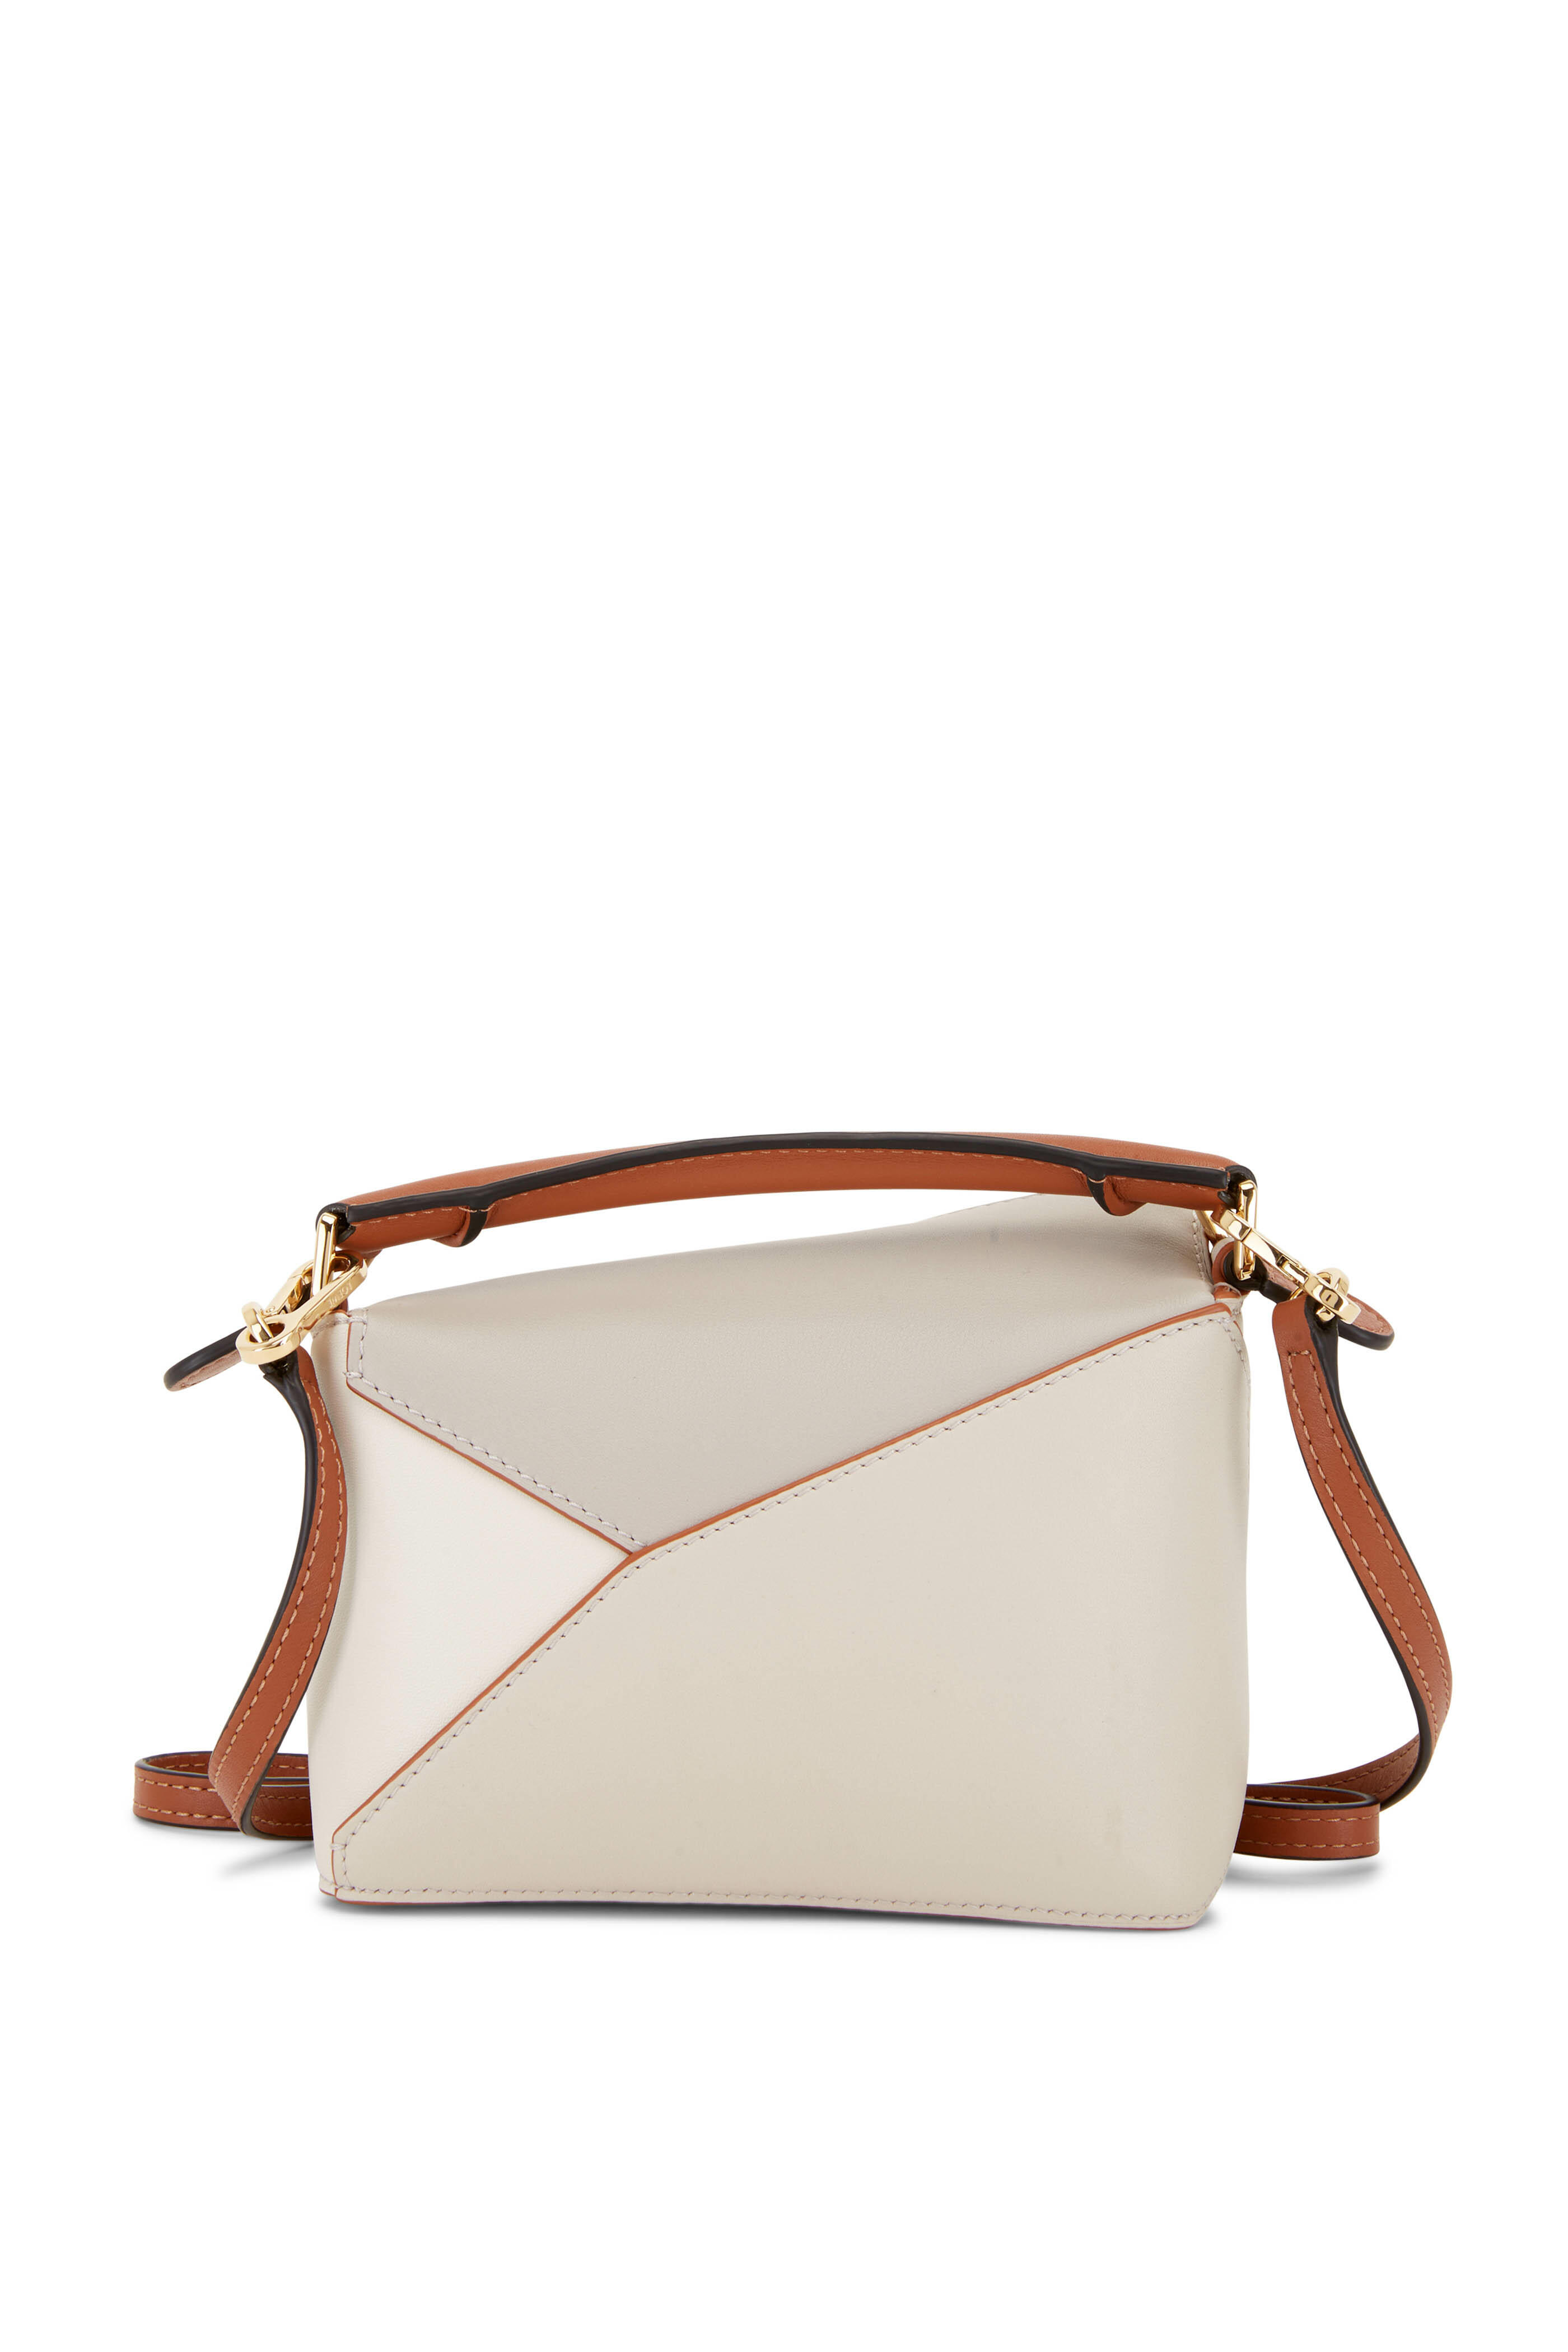 LOEWE Puzzle Small Smooth Leather Bag in Tan